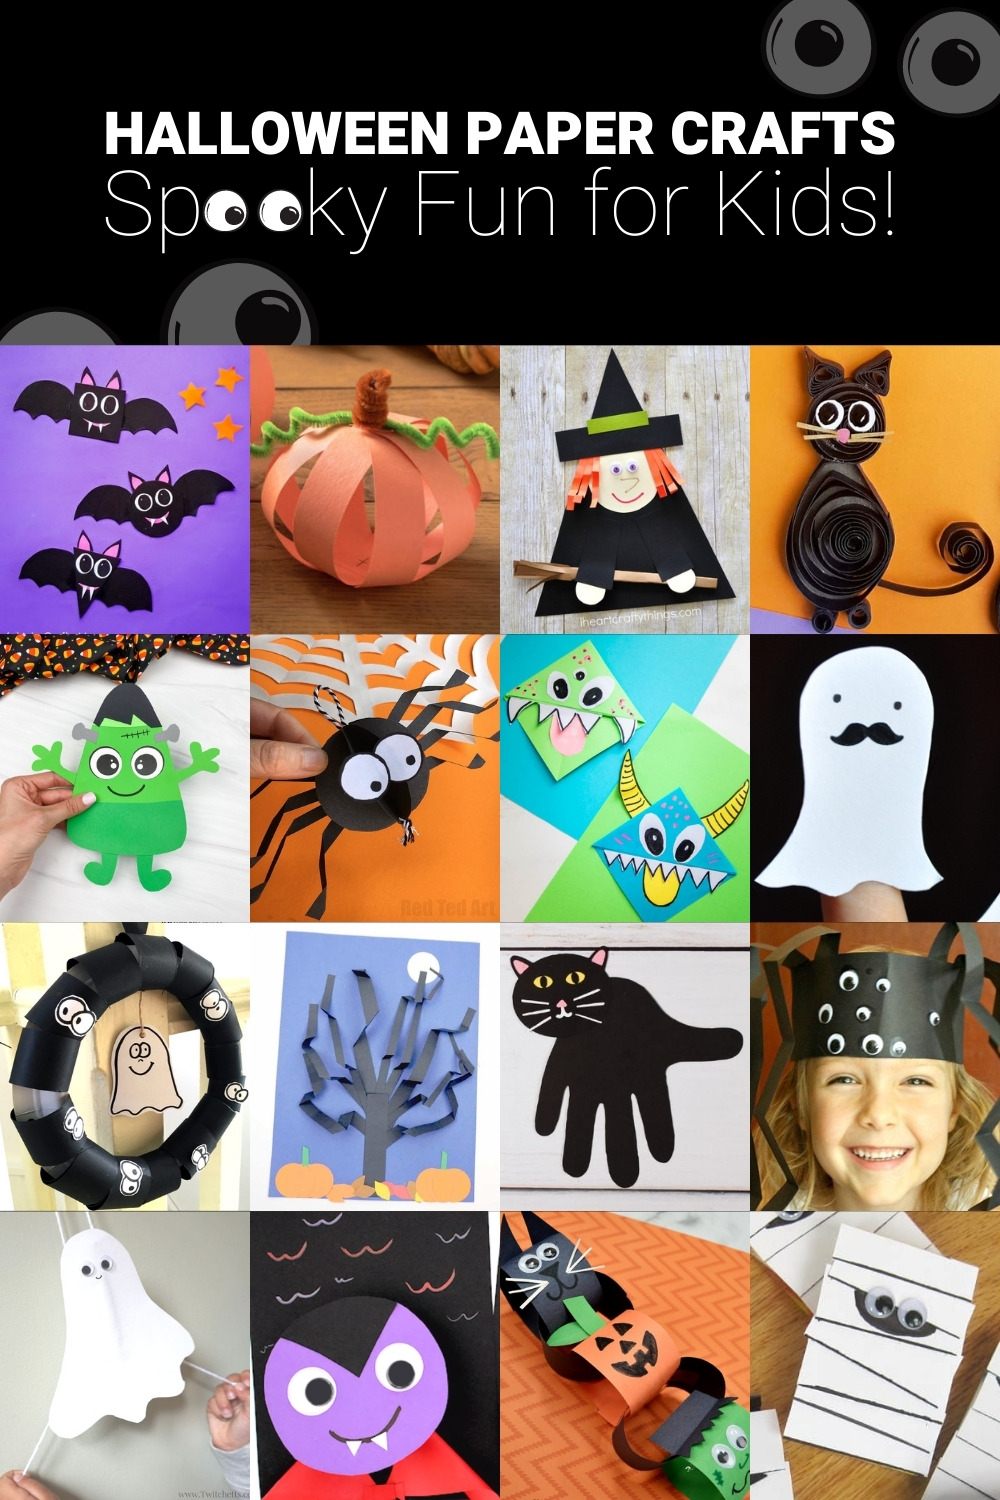 These Halloween Paper Crafts Are Spooky Fun - DIY Candy